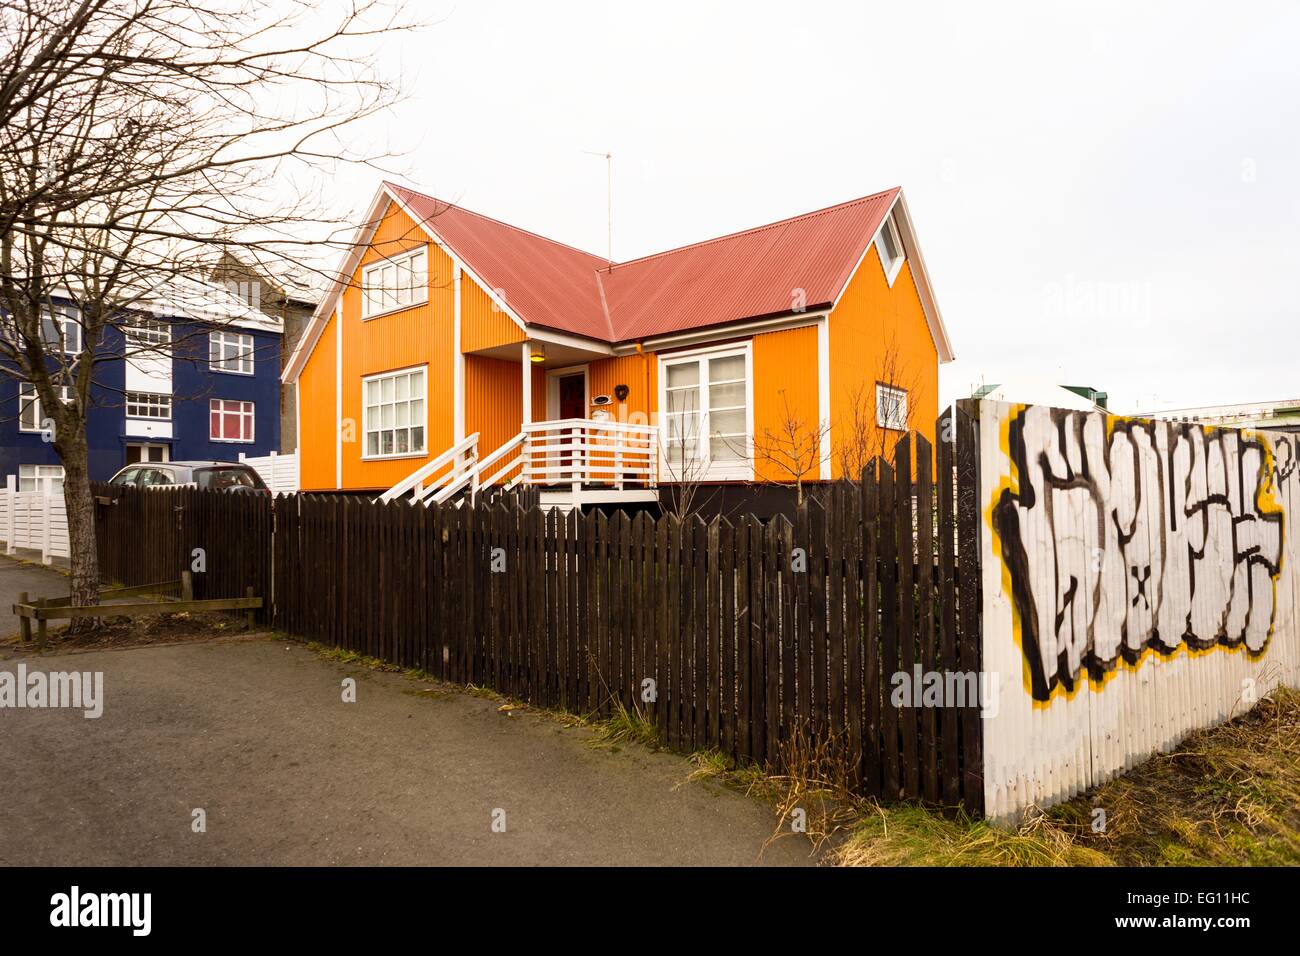 An orange and red painted house surrounded by a fence with graffiti around in Reykjavik, Iceland, 2014. Stock Photo